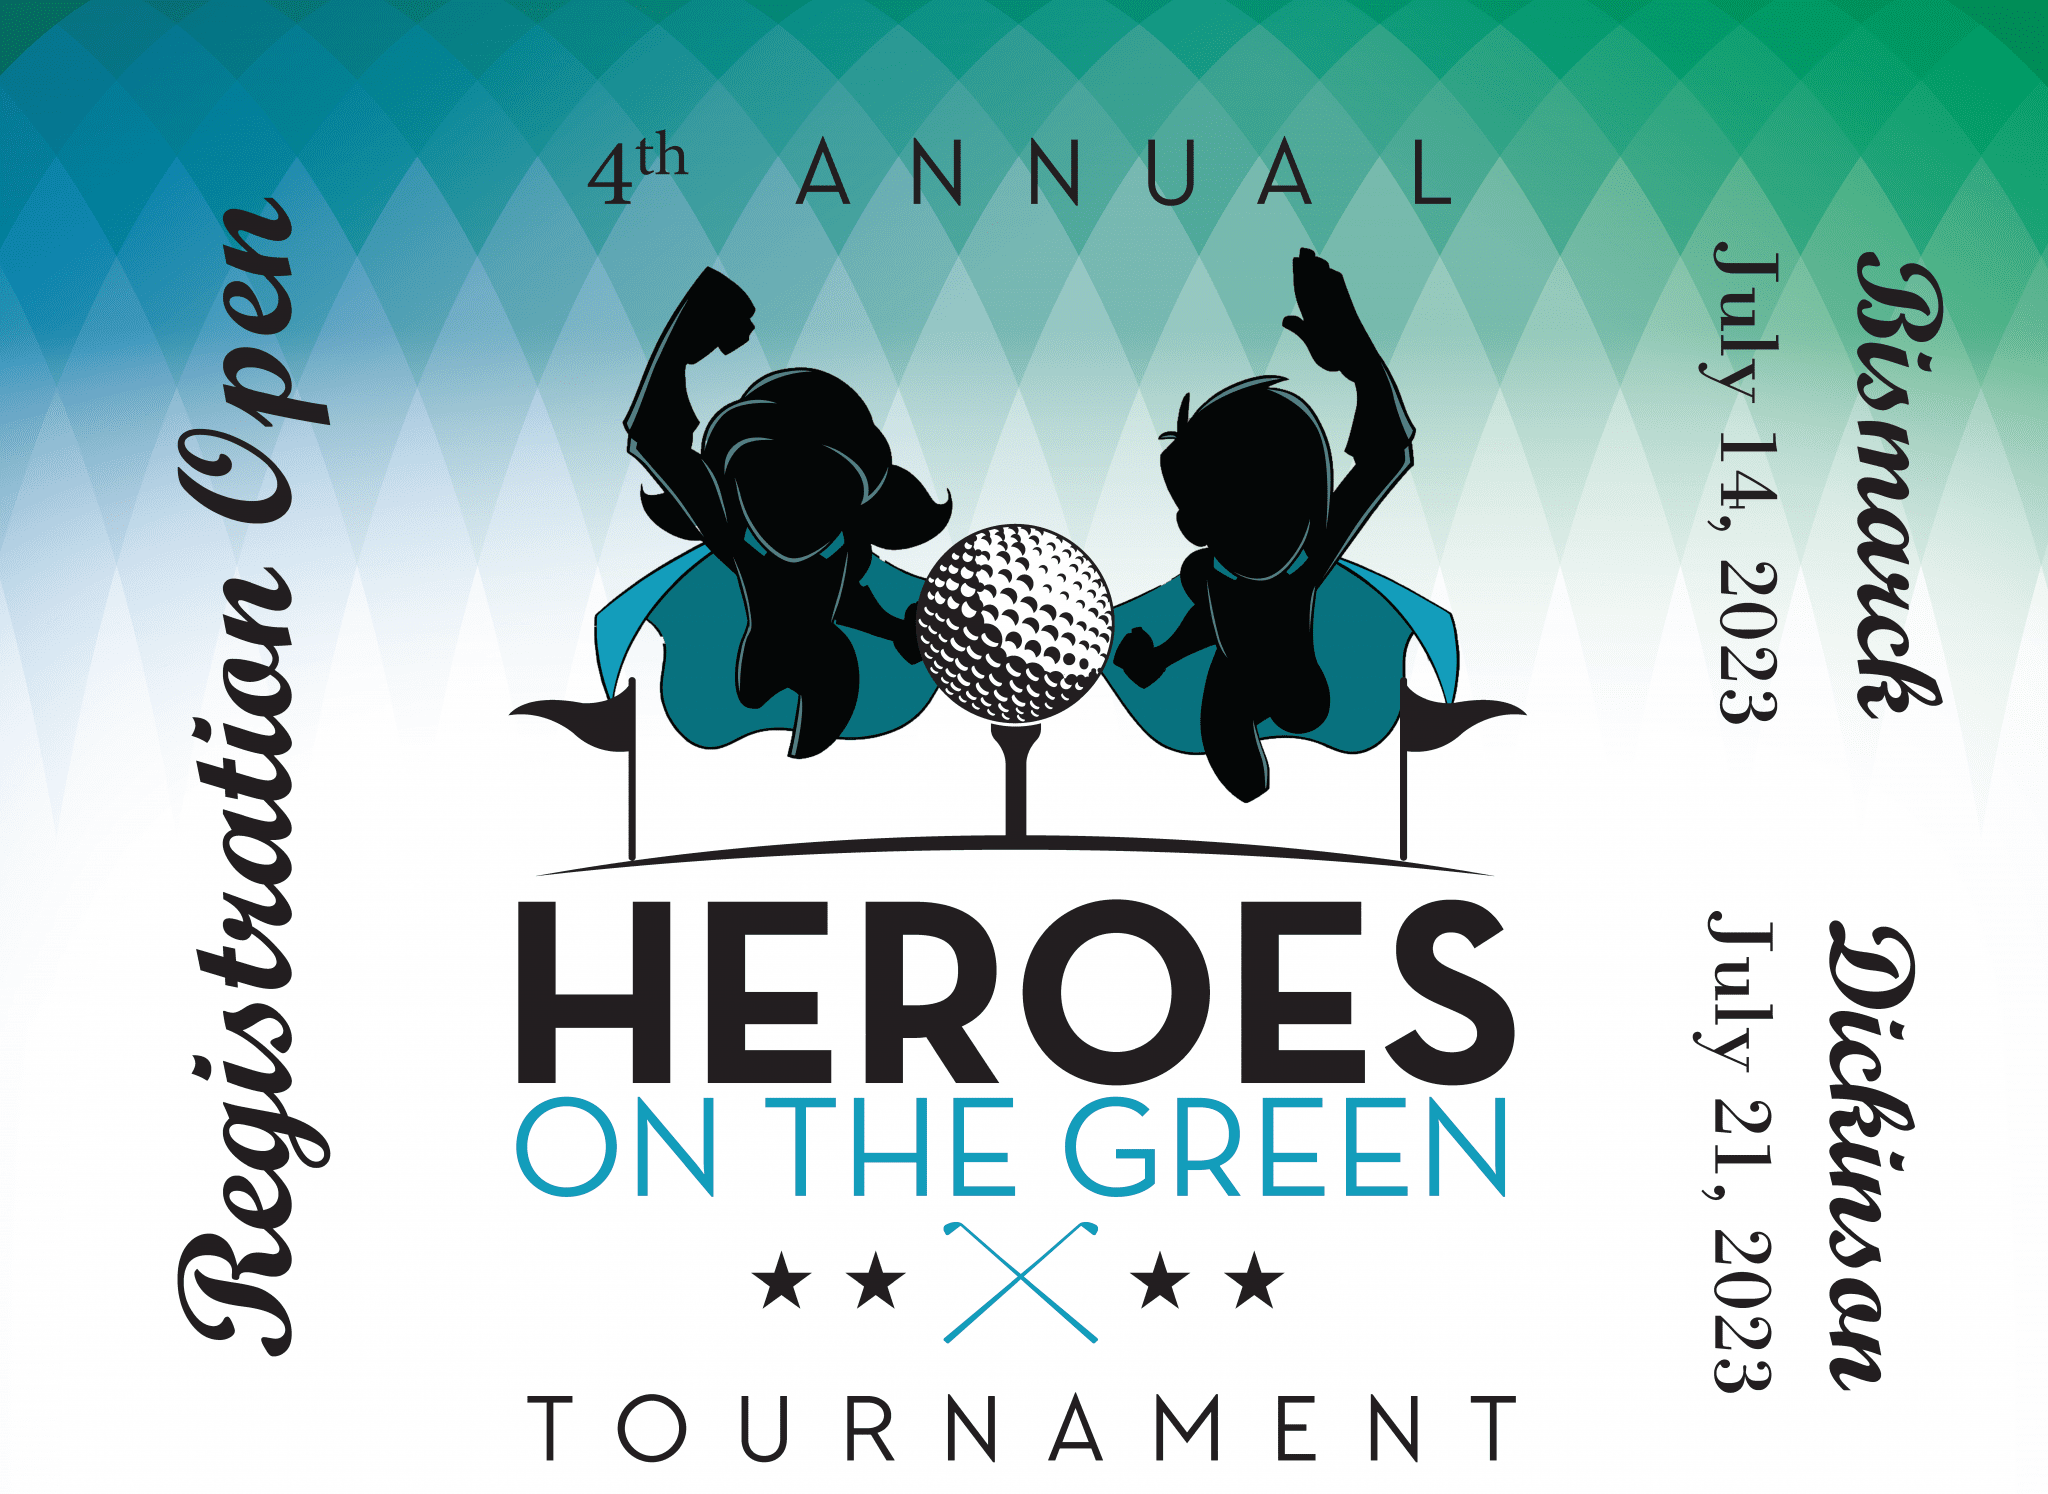 Registration open for the 4th annual Heroes on the Green tournament.